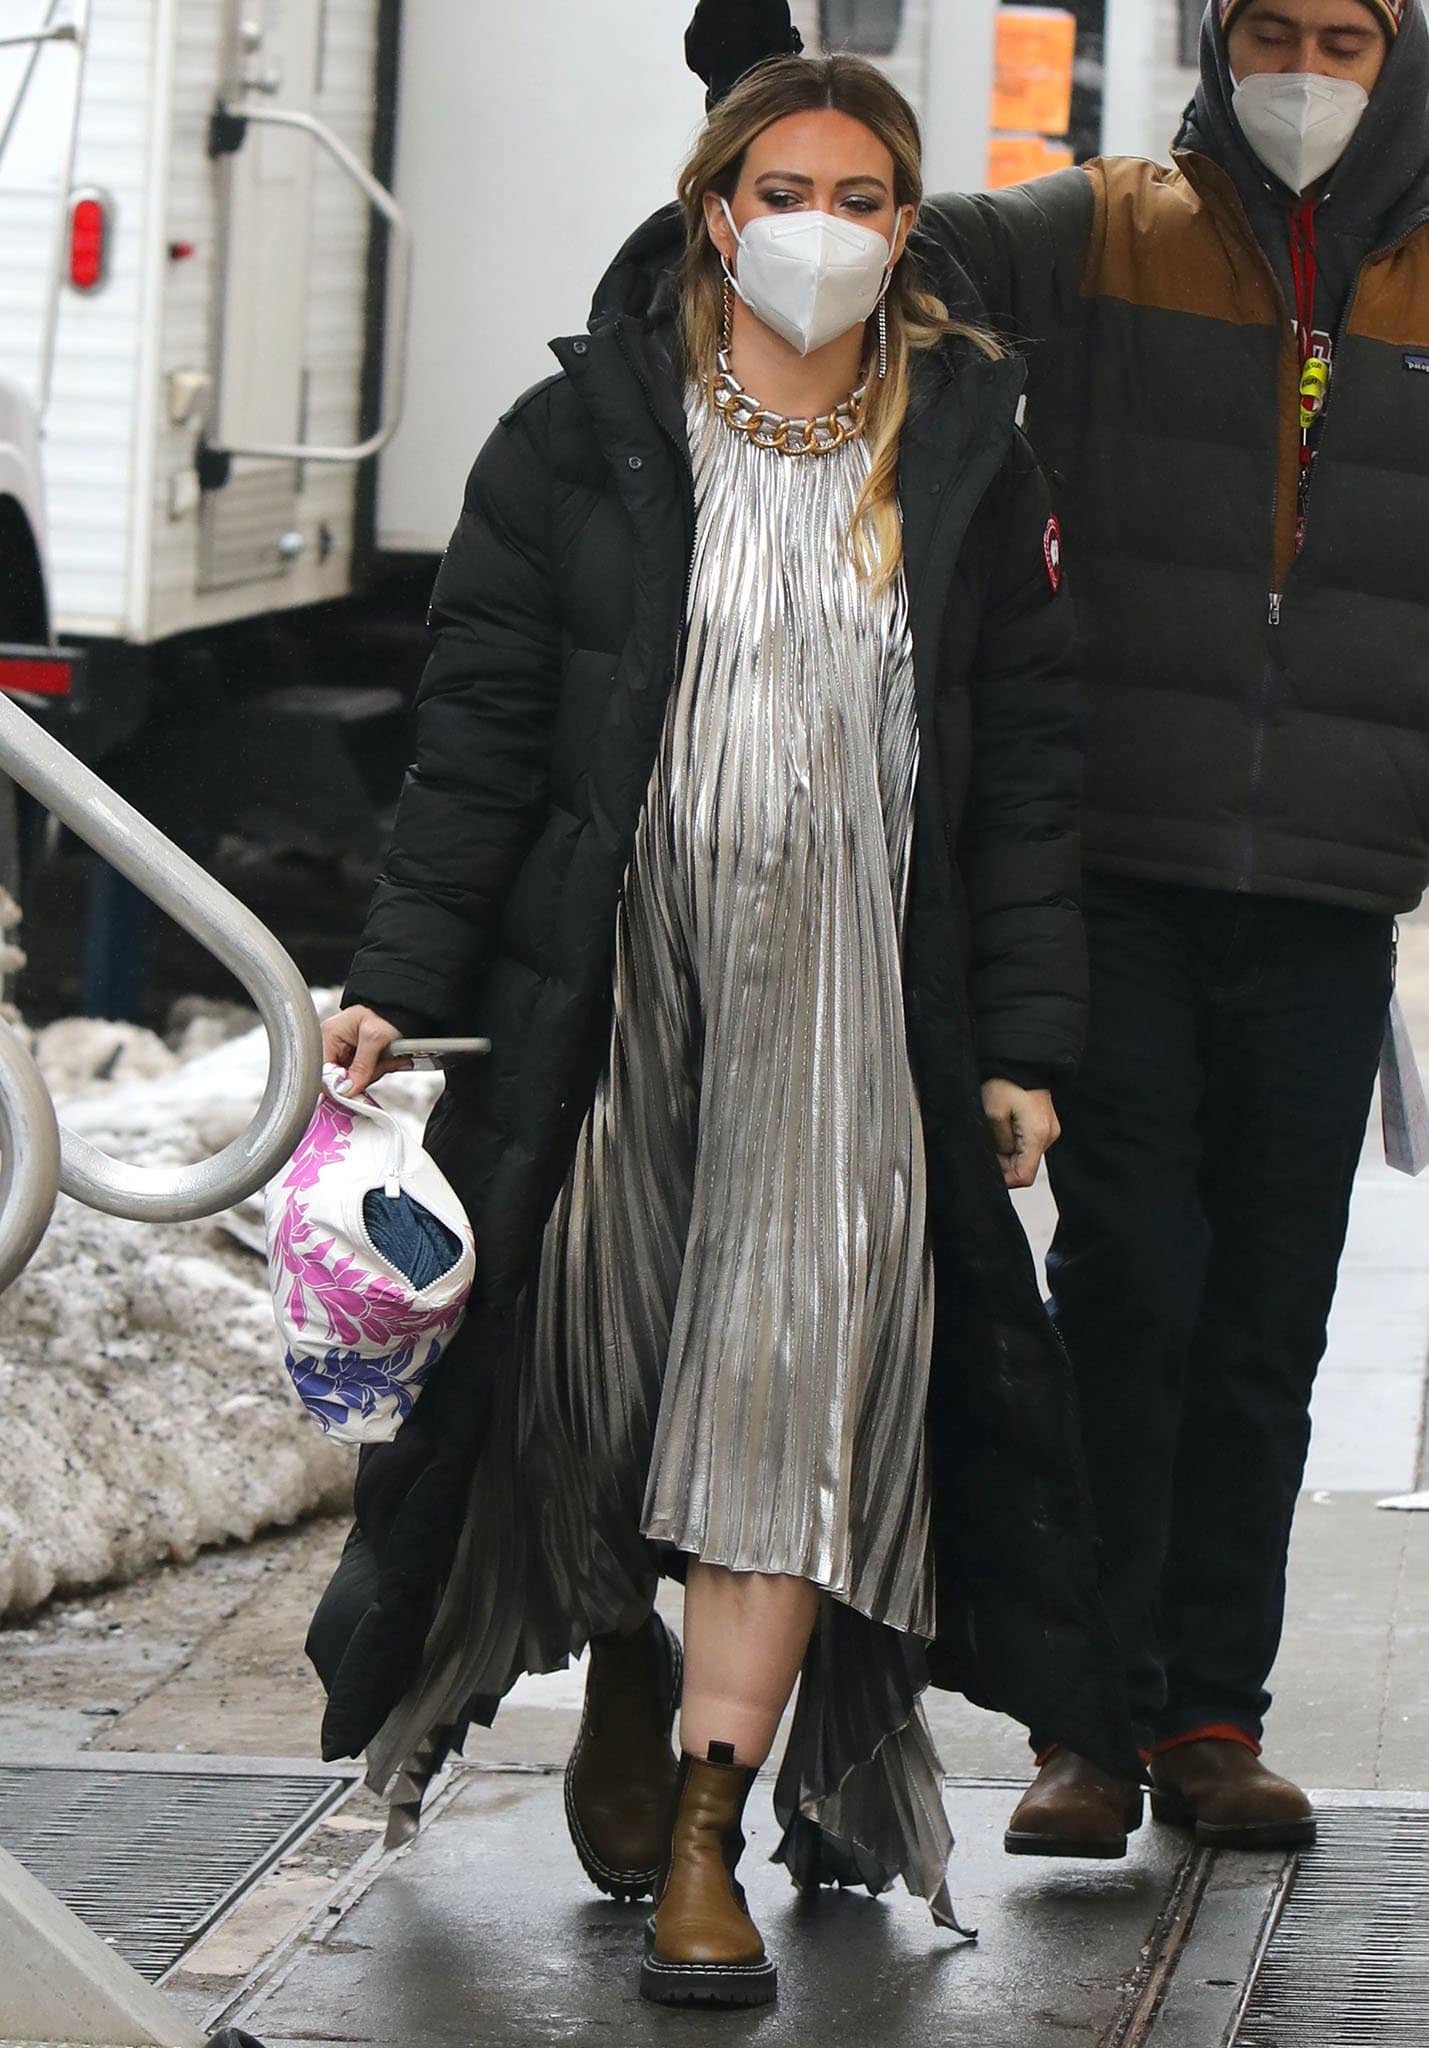 Hilary Duff shines in Givenchy silver pleated dress on February 9, 2021